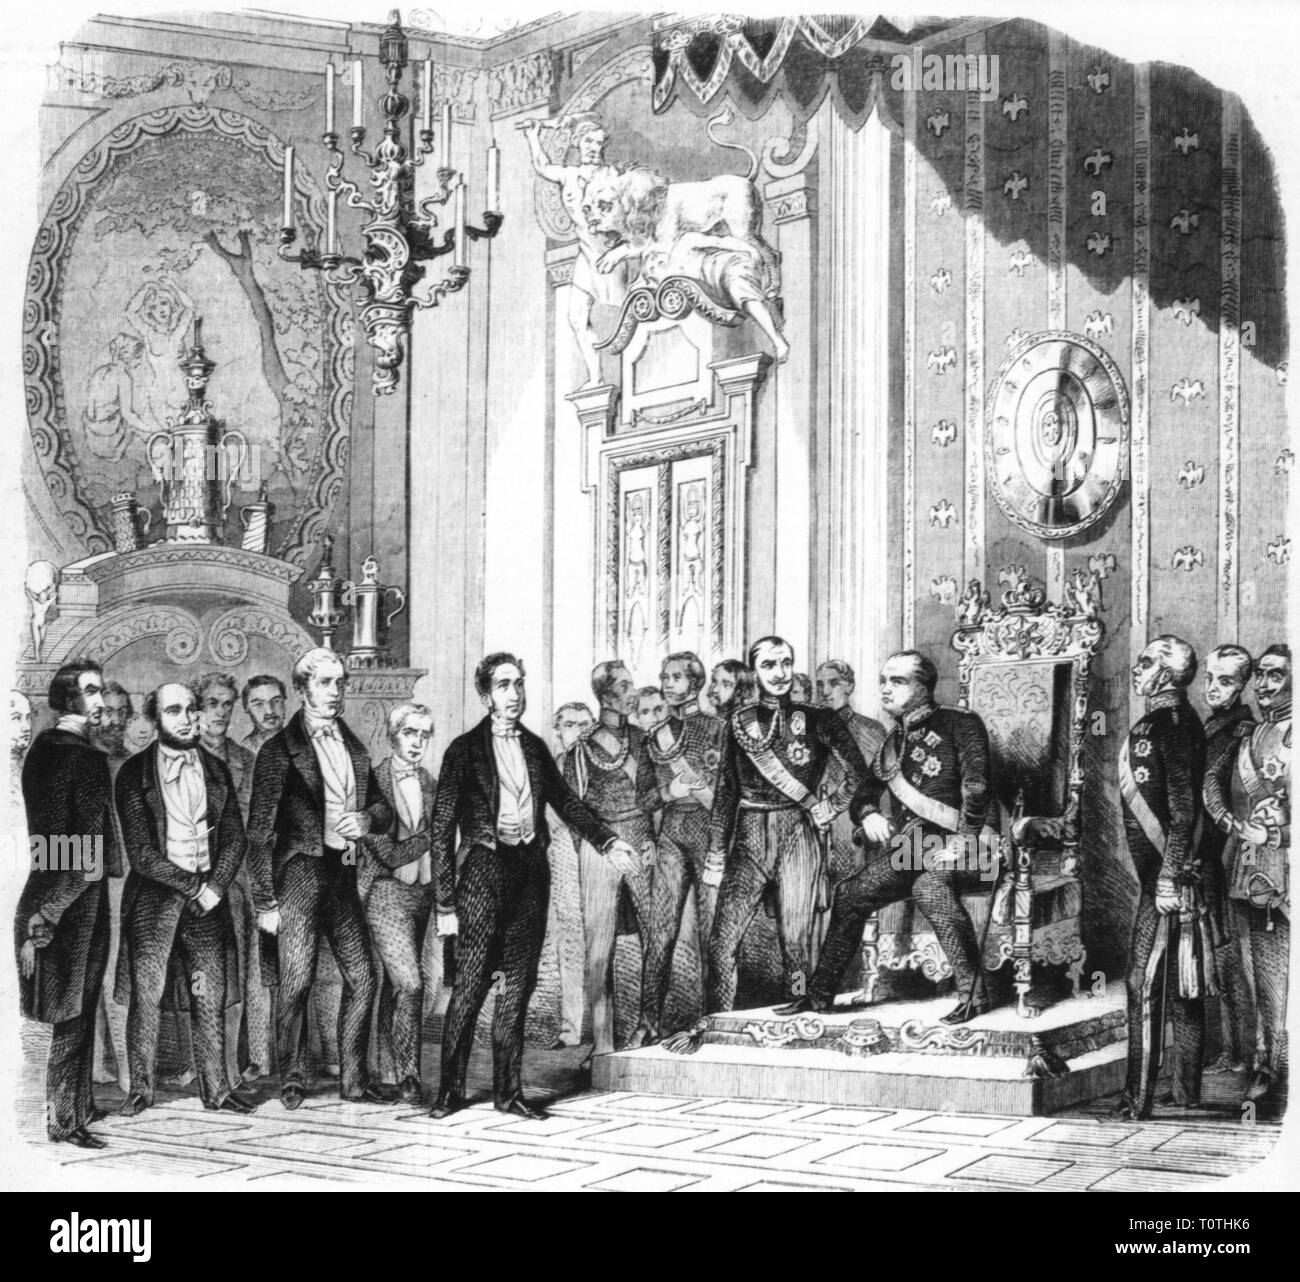 Revolutions 1848 - 1849, Germany, Kaiserdeputation, representatives of the Frankfurt National Assembly offering the Prussian king Frederic William IV the German imperial crown, Berlin, 3.4.1849, wood engraving, 19th century, Heinrich von Gagern, Eduard Simson, prince William (I.), House of Hohenzollern, Kingdom of Prussia, castle, castles, city palace, city palaces, politics, policy, delegation, delegations, deputation, offering, March Revolution, parliament, parliaments, monarchy, monarchies, imperial dignity, German Confederation (1815-1866), G, Additional-Rights-Clearance-Info-Not-Available Stock Photo